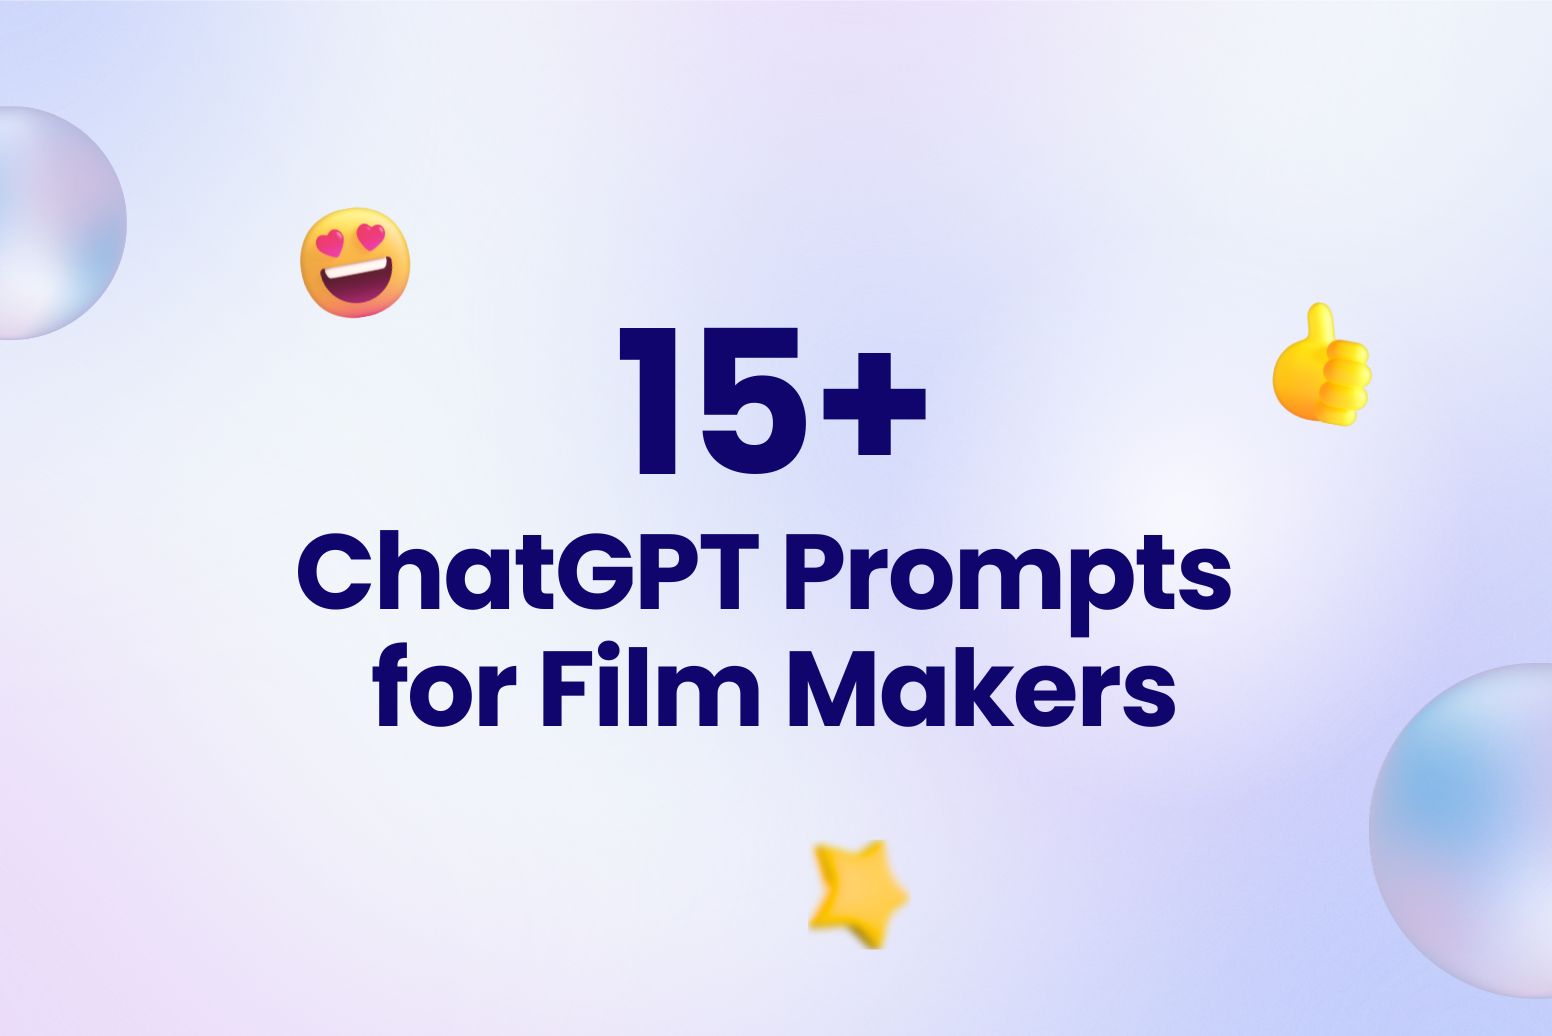 15+ ChatGPT Prompts for Film Makers